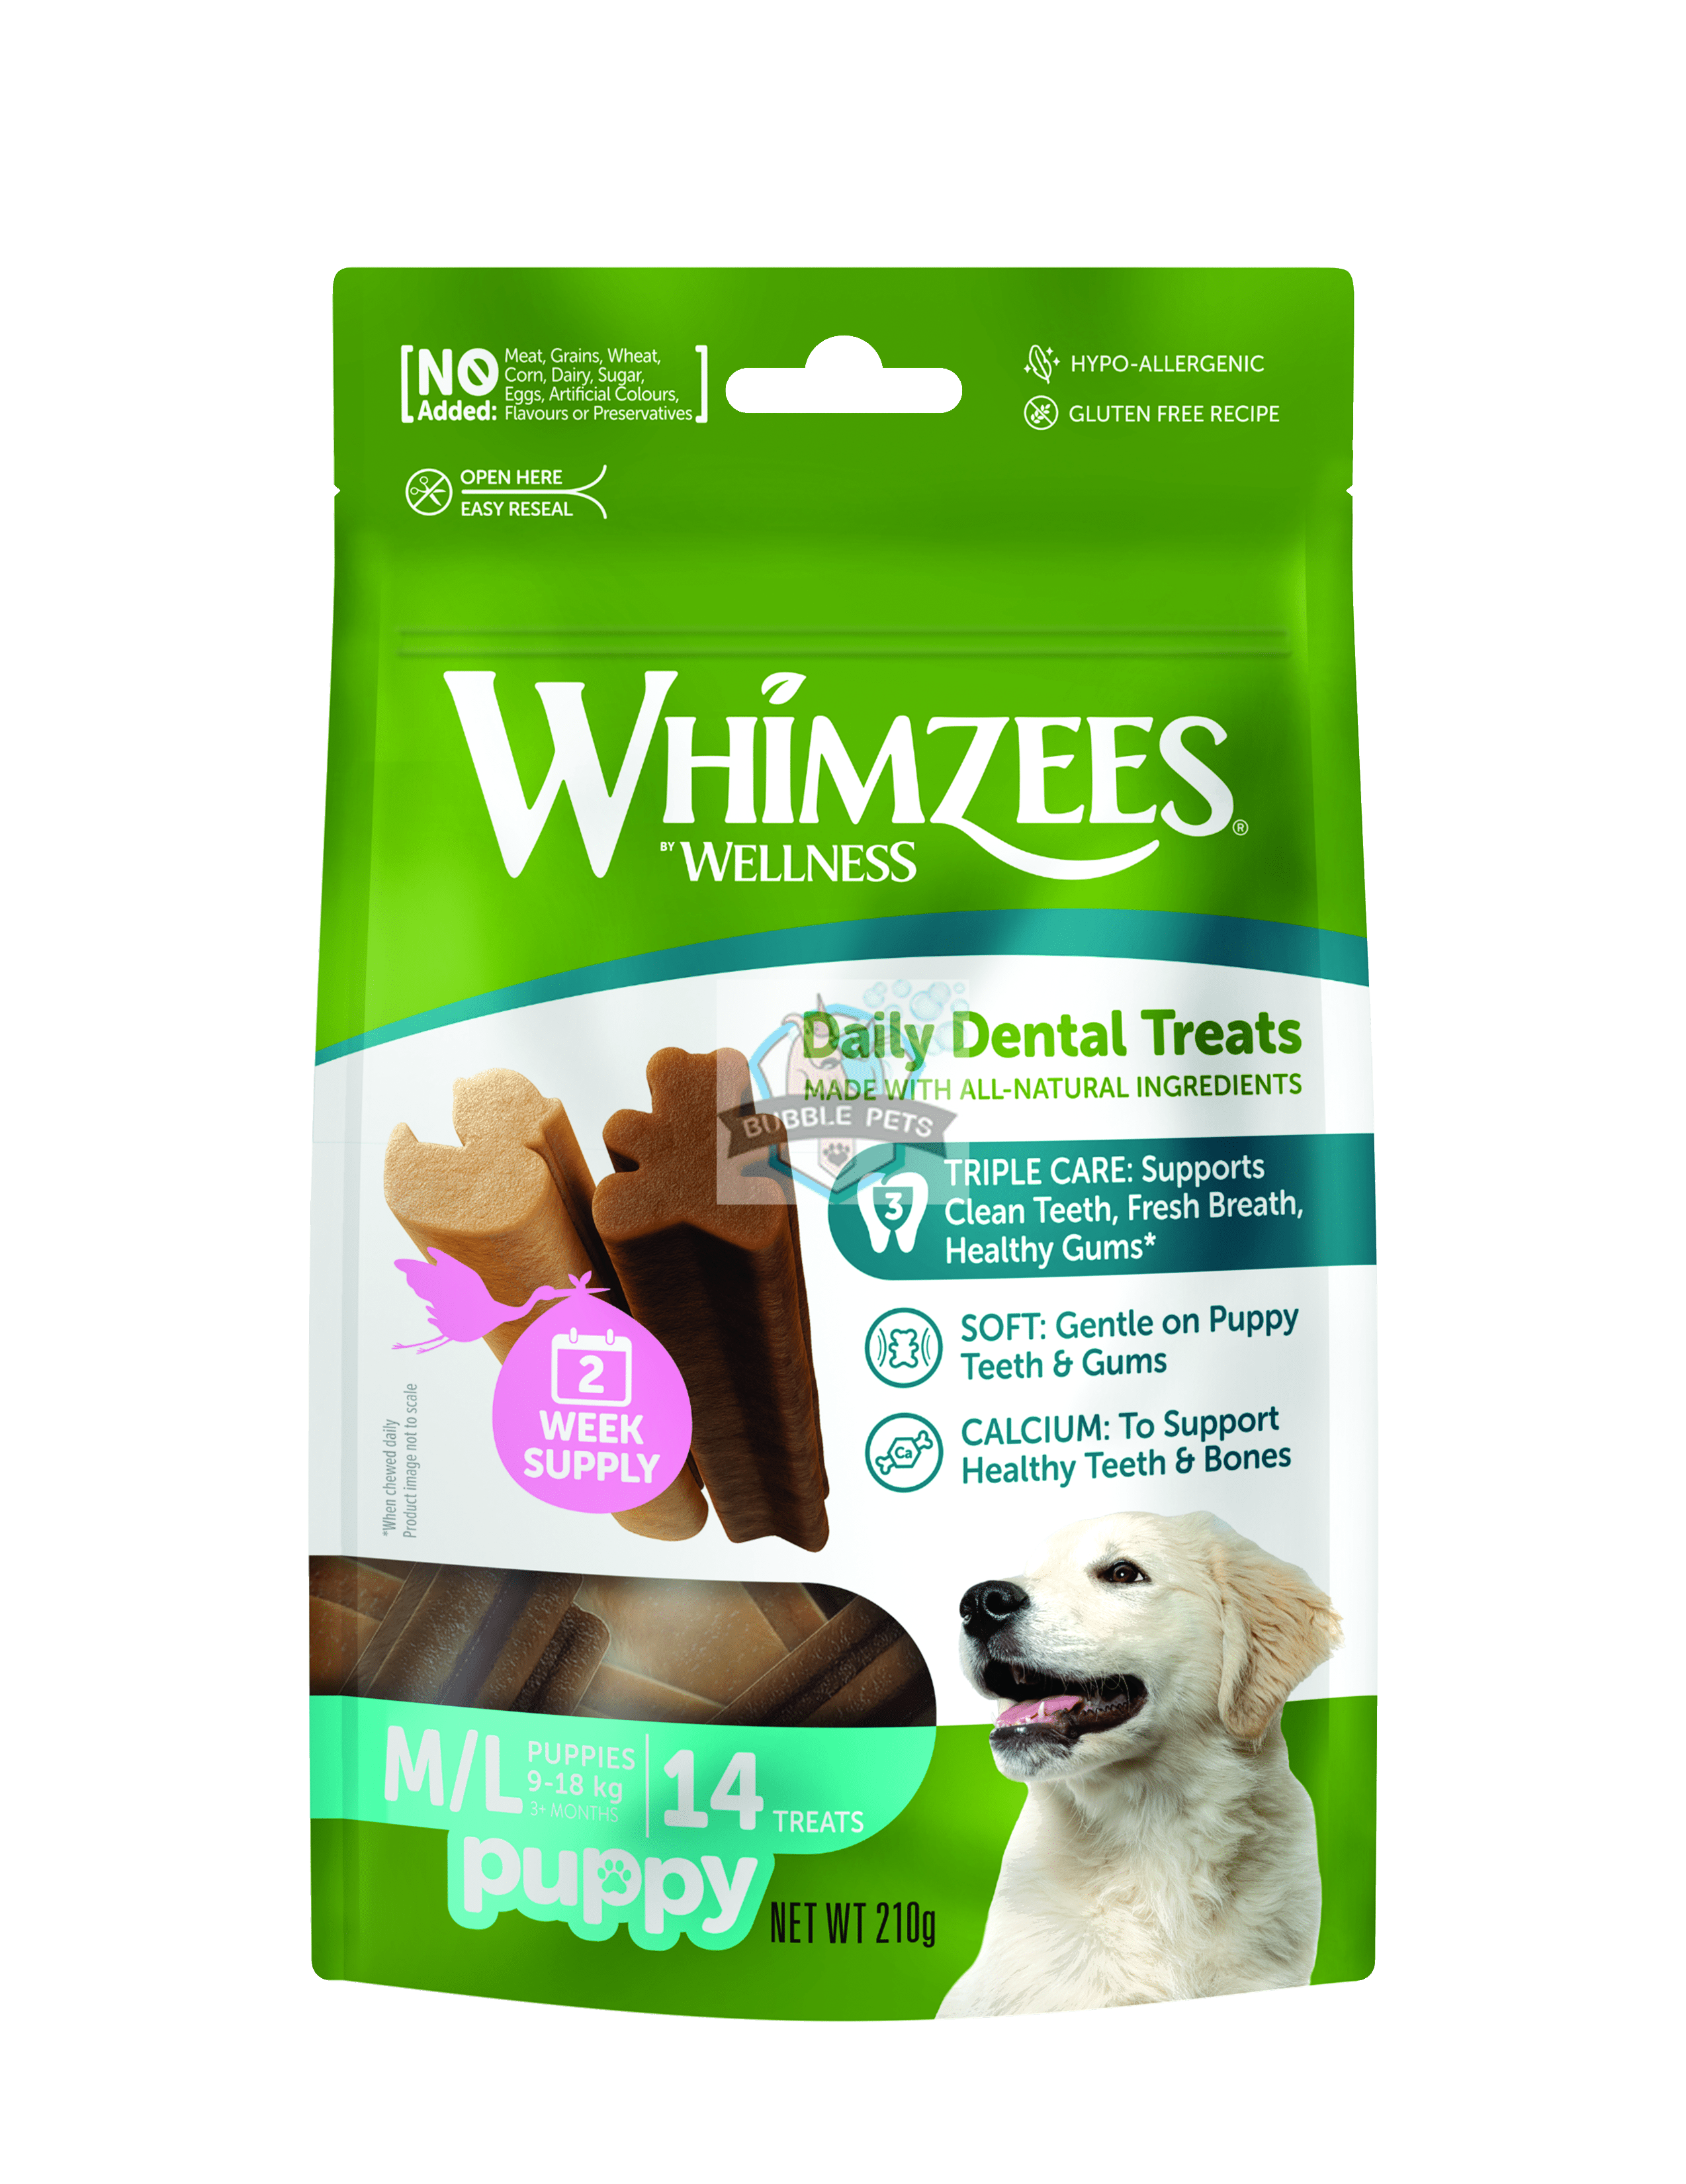 Whimzees Daily Dental Treats for Puppies